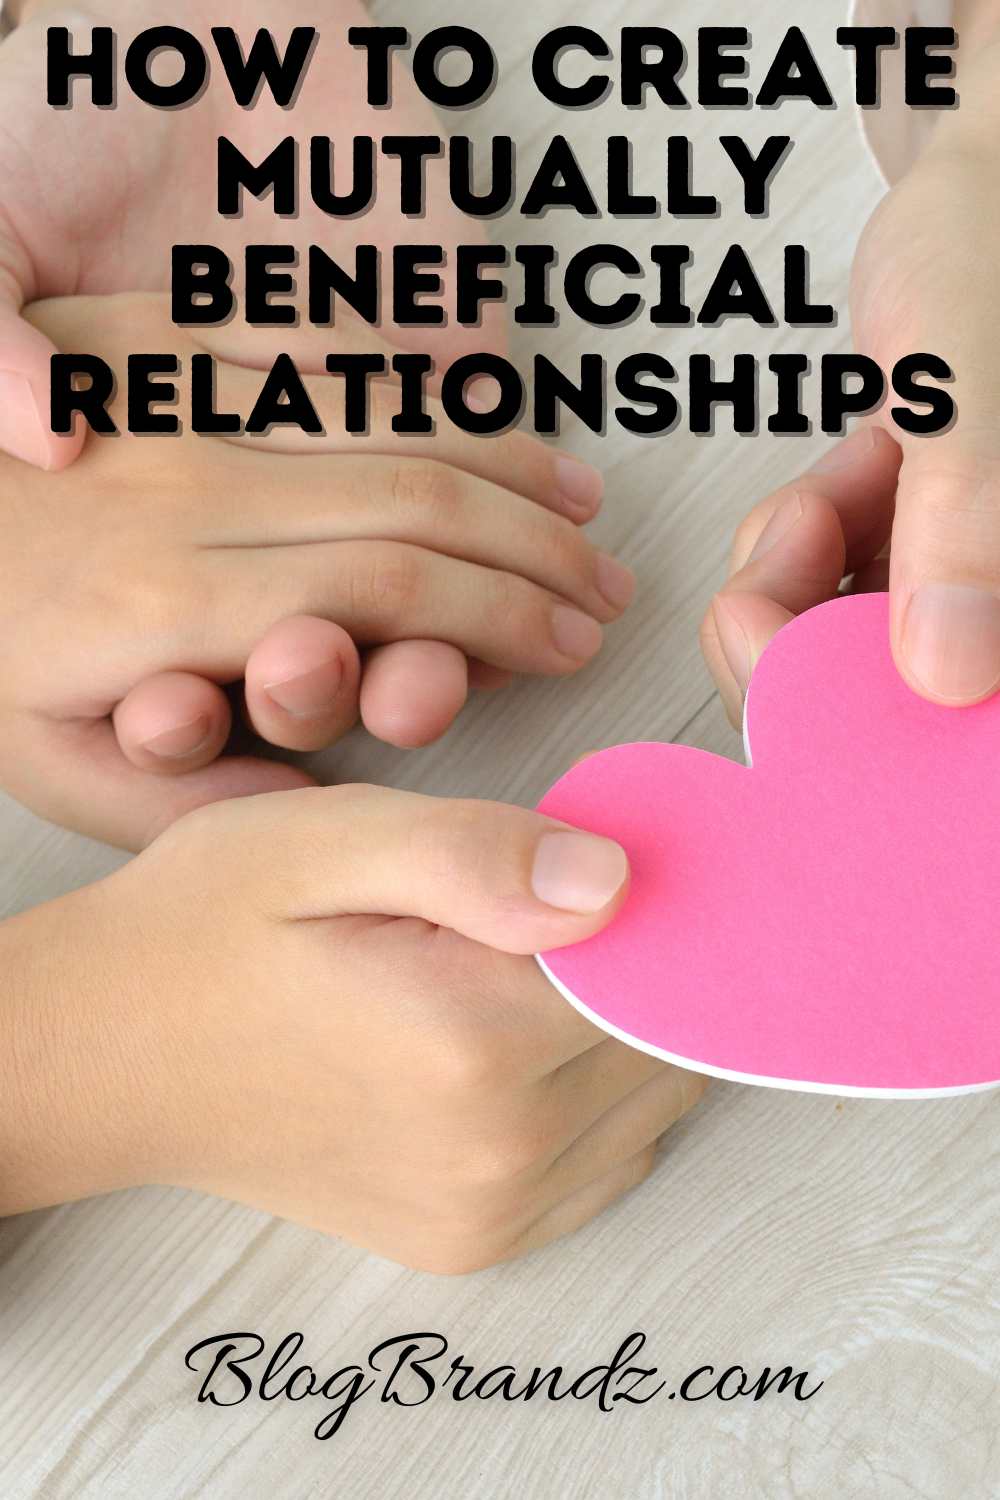 Mutually Beneficial Relationship